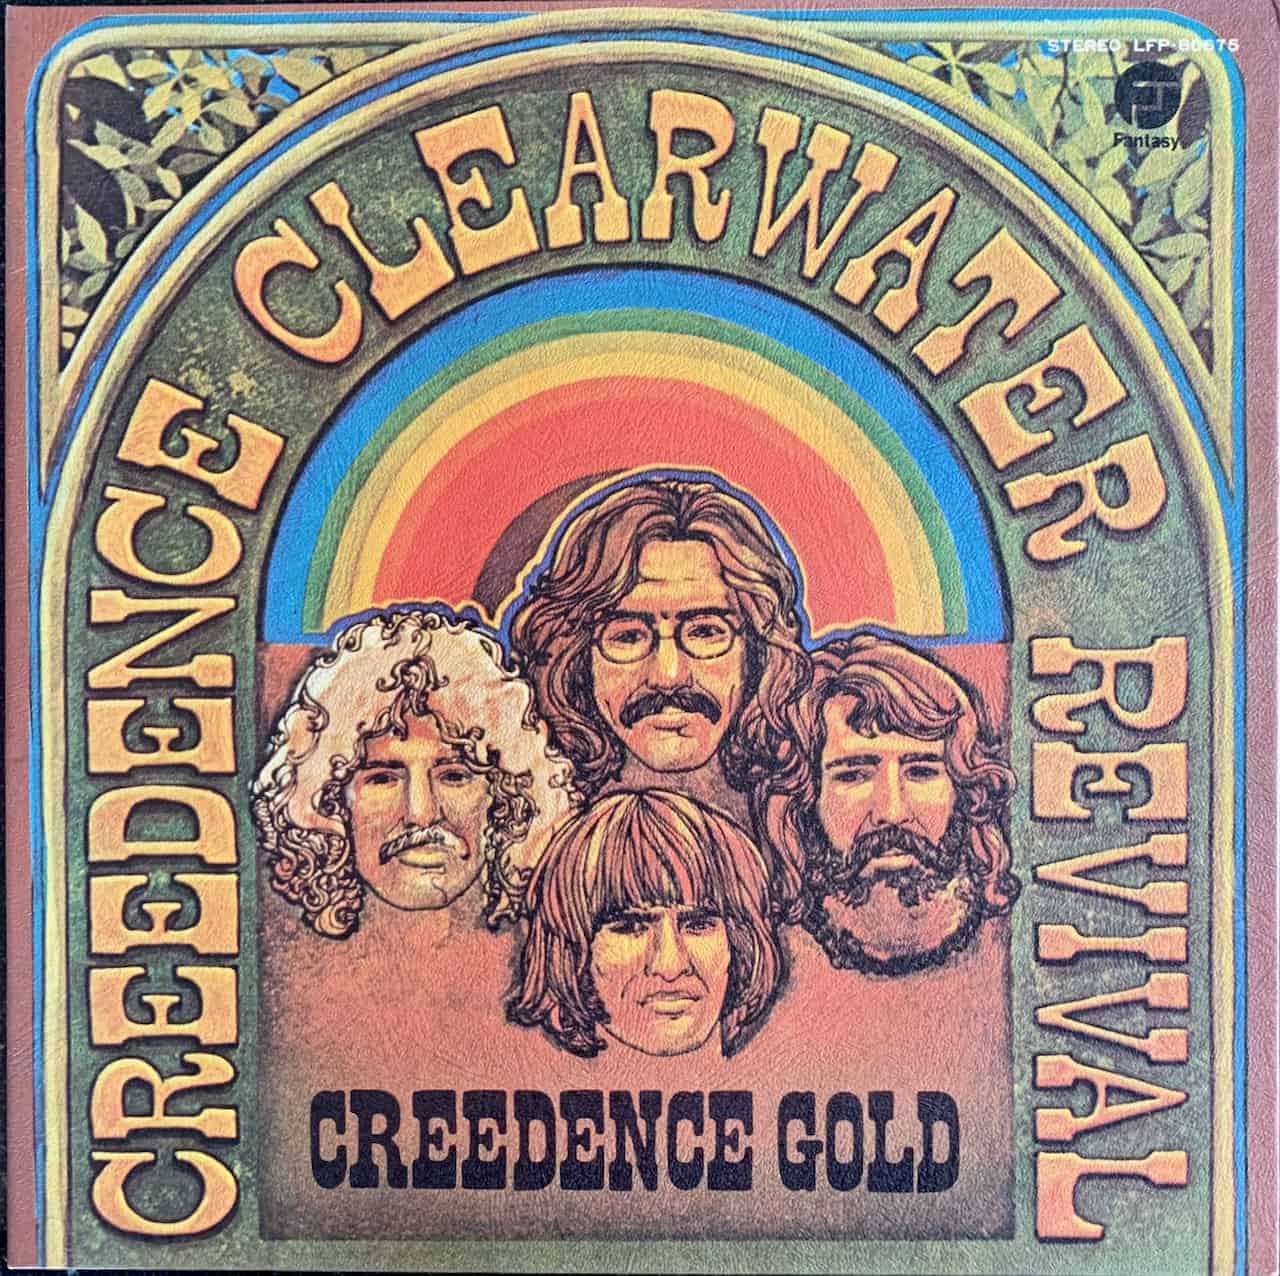 Creedence Clearwater Revival ‎– Creedence Gold (Japanese Pressing) - Vinyl  Pussycat Records